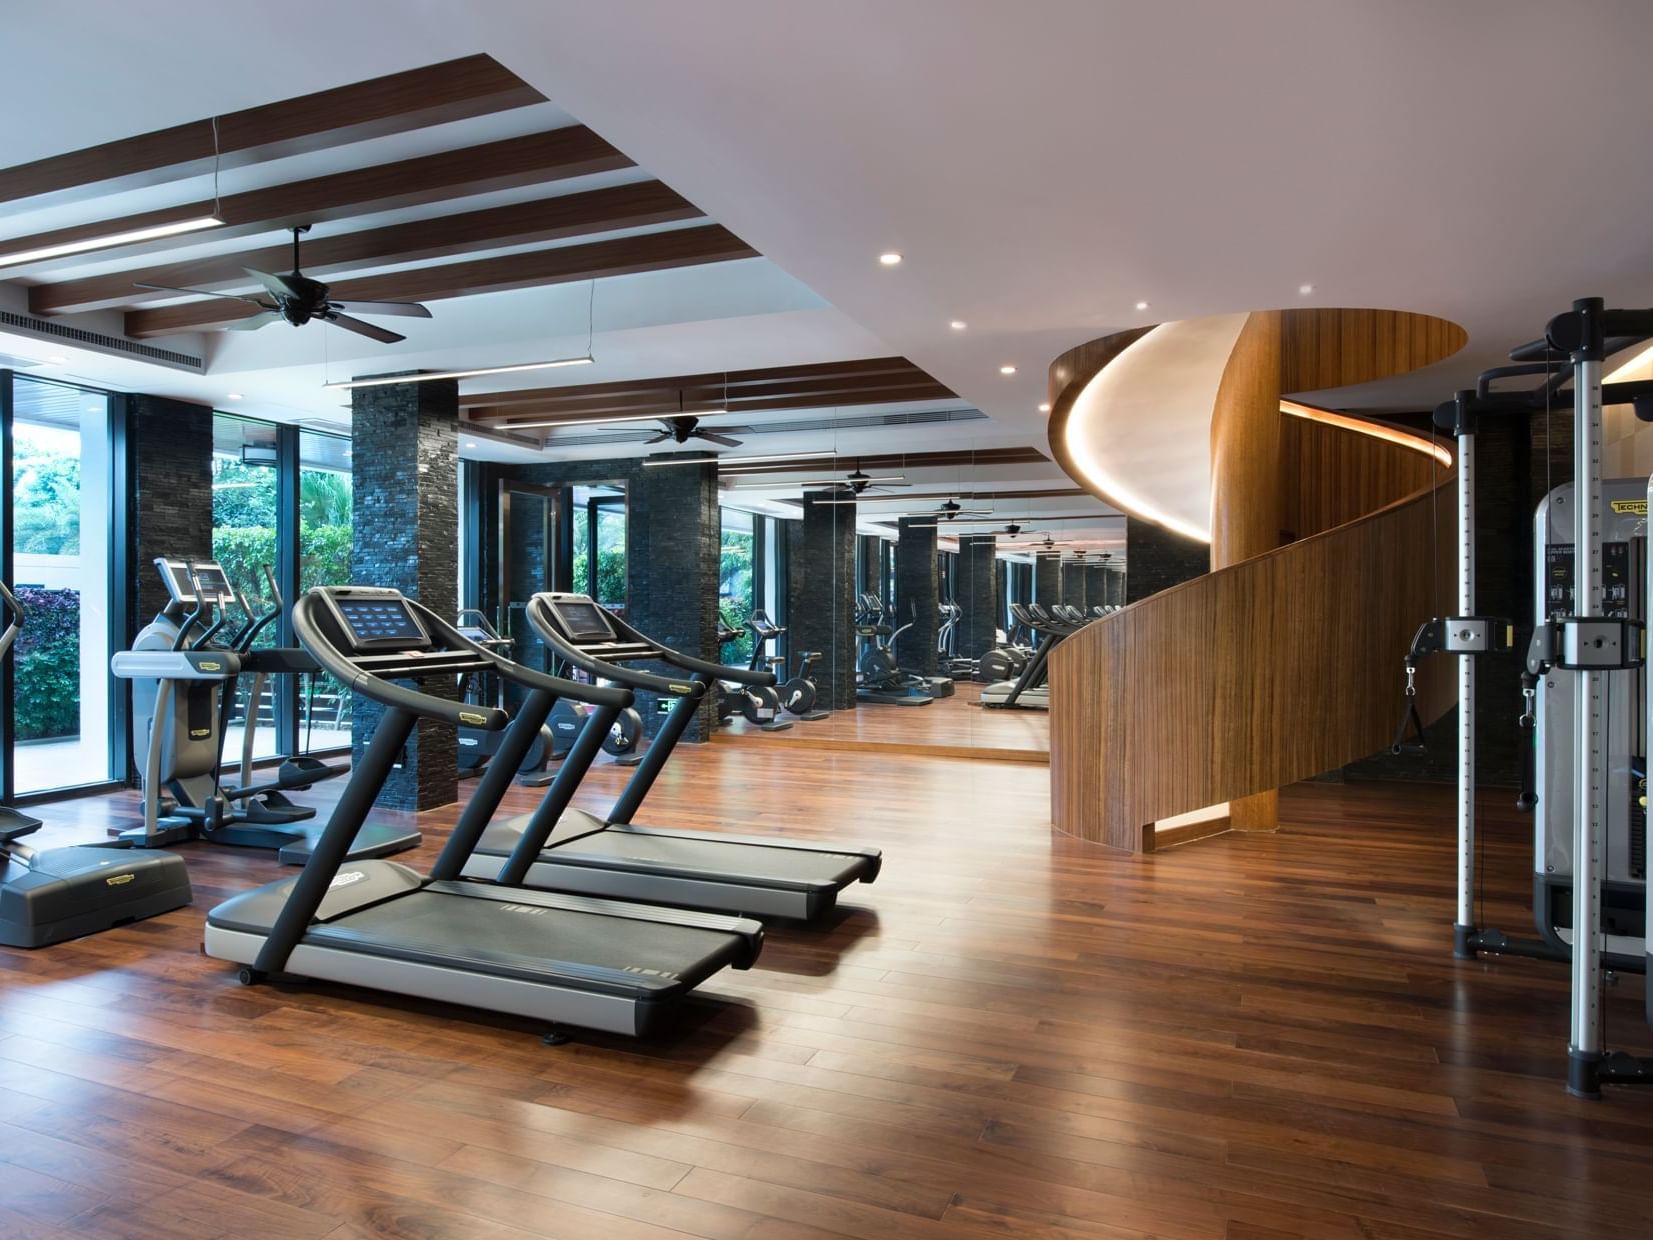 A fully equipped gym at White Swan hotel